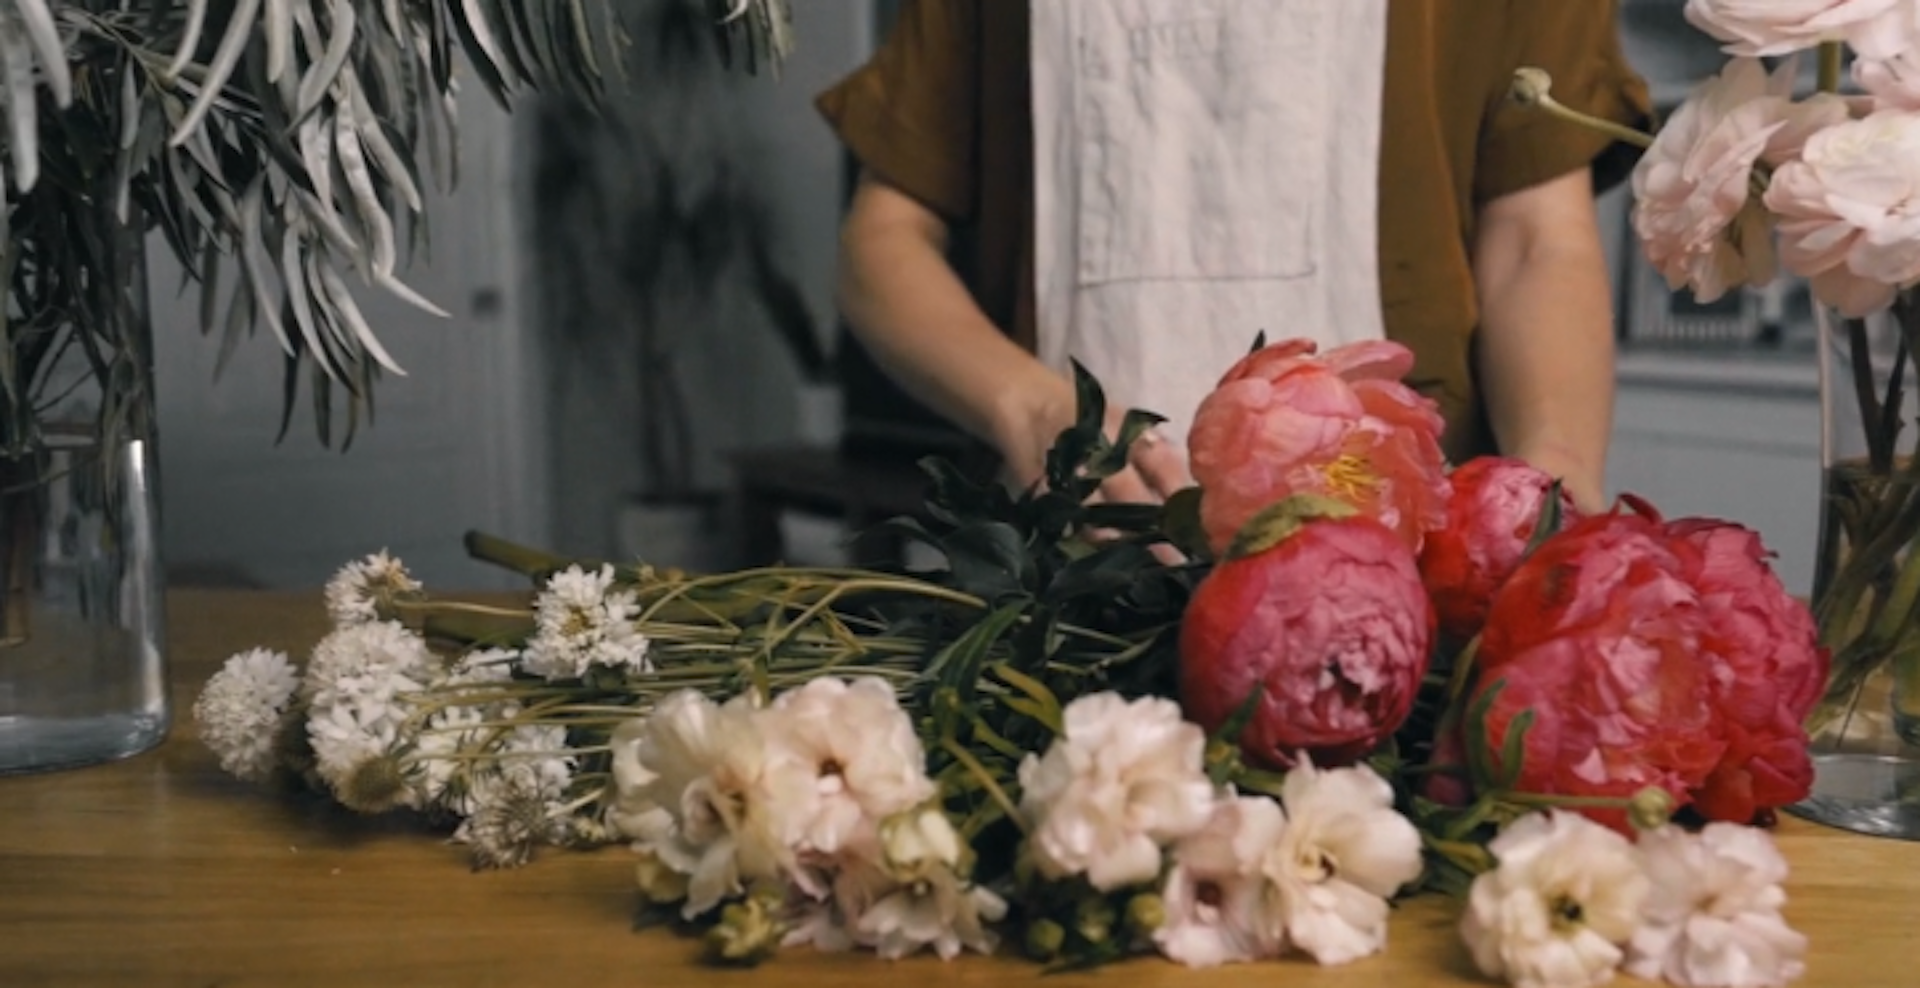 This 1 Minute Flower Shop Promo Proves The Value Of Video Vimeo Blog